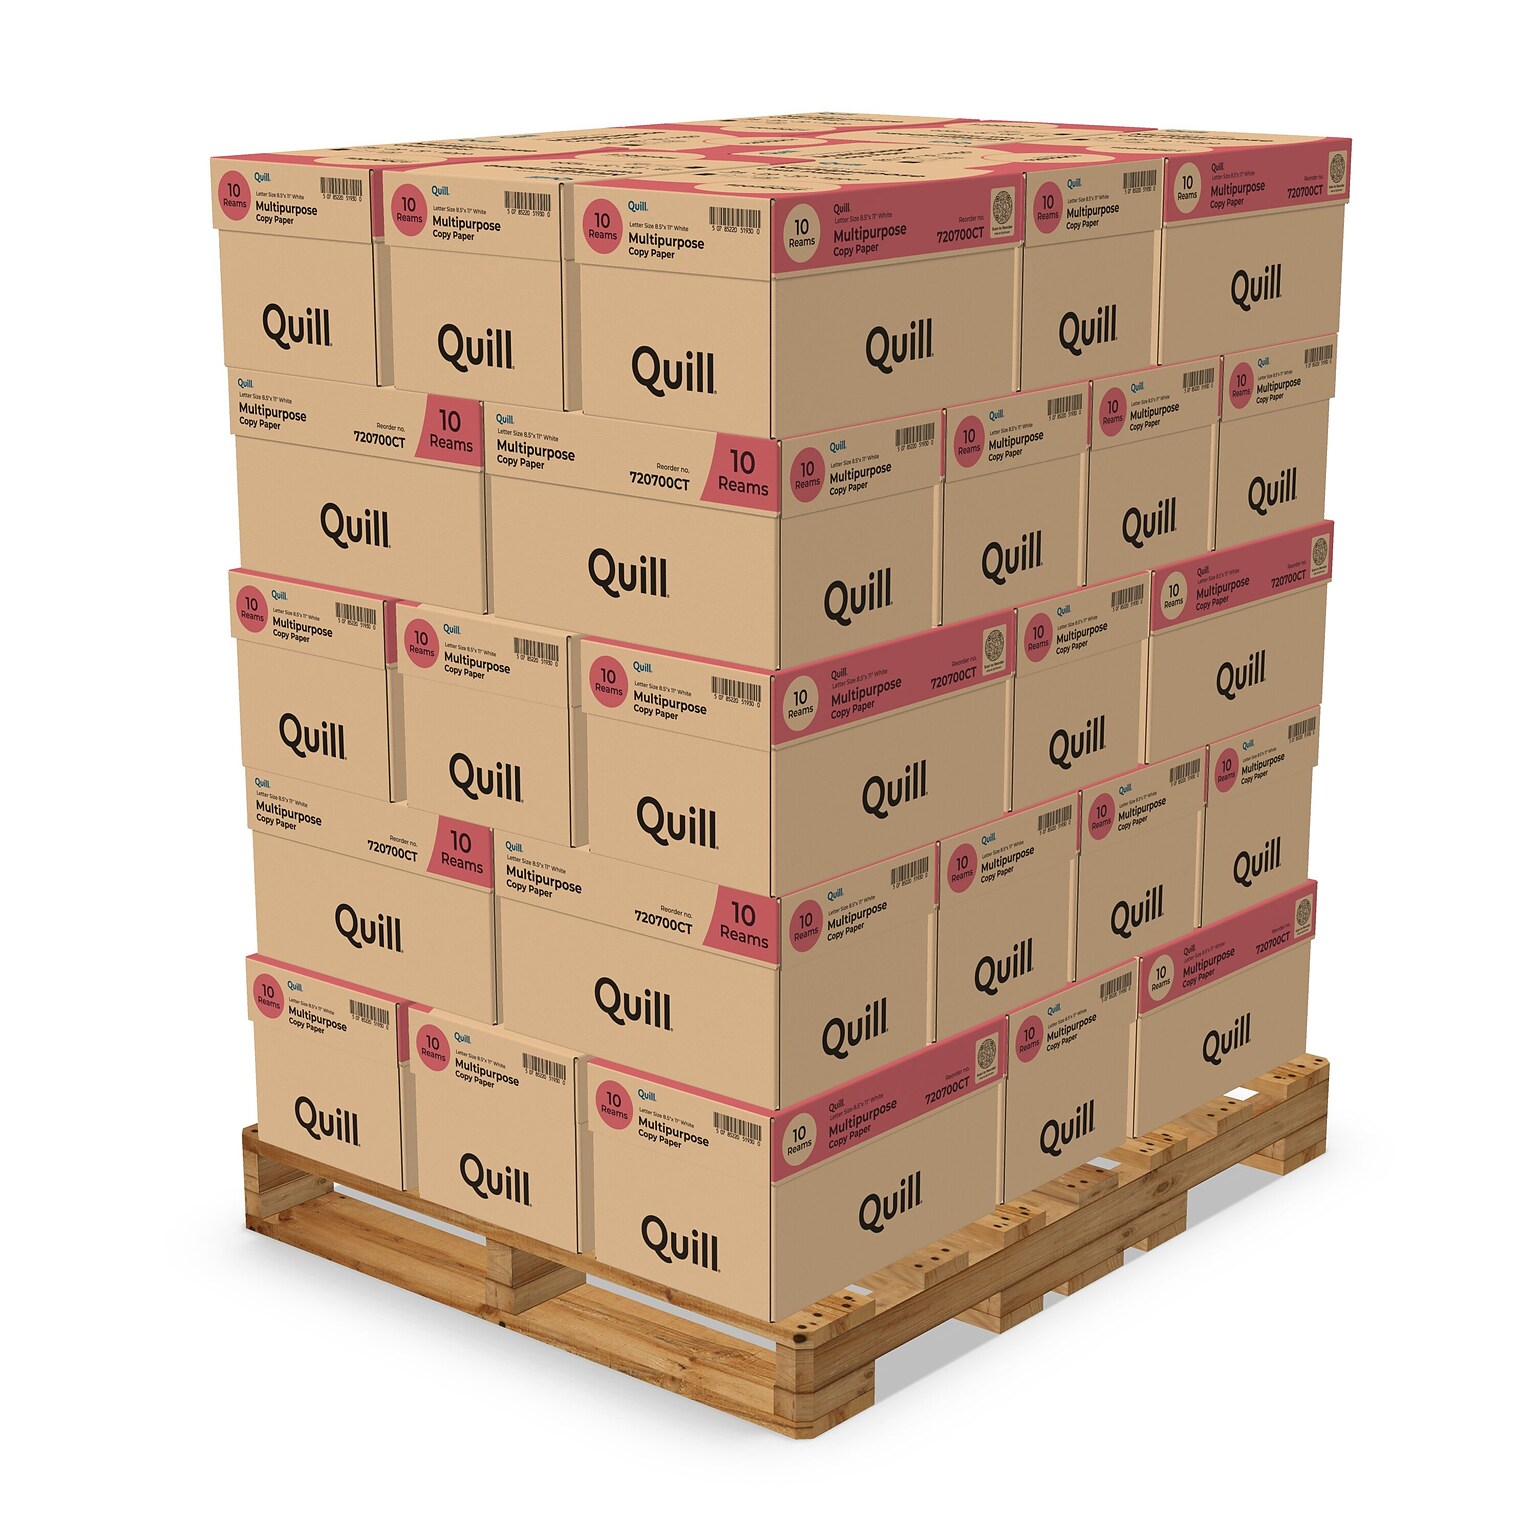 Quill Brand® 8.5 x 11 Multipurpose Copy Paper by the Pallet, 20 lbs., 94 Brightness, 40 Cartons/Pallet, 6-8 Pallets (720700)